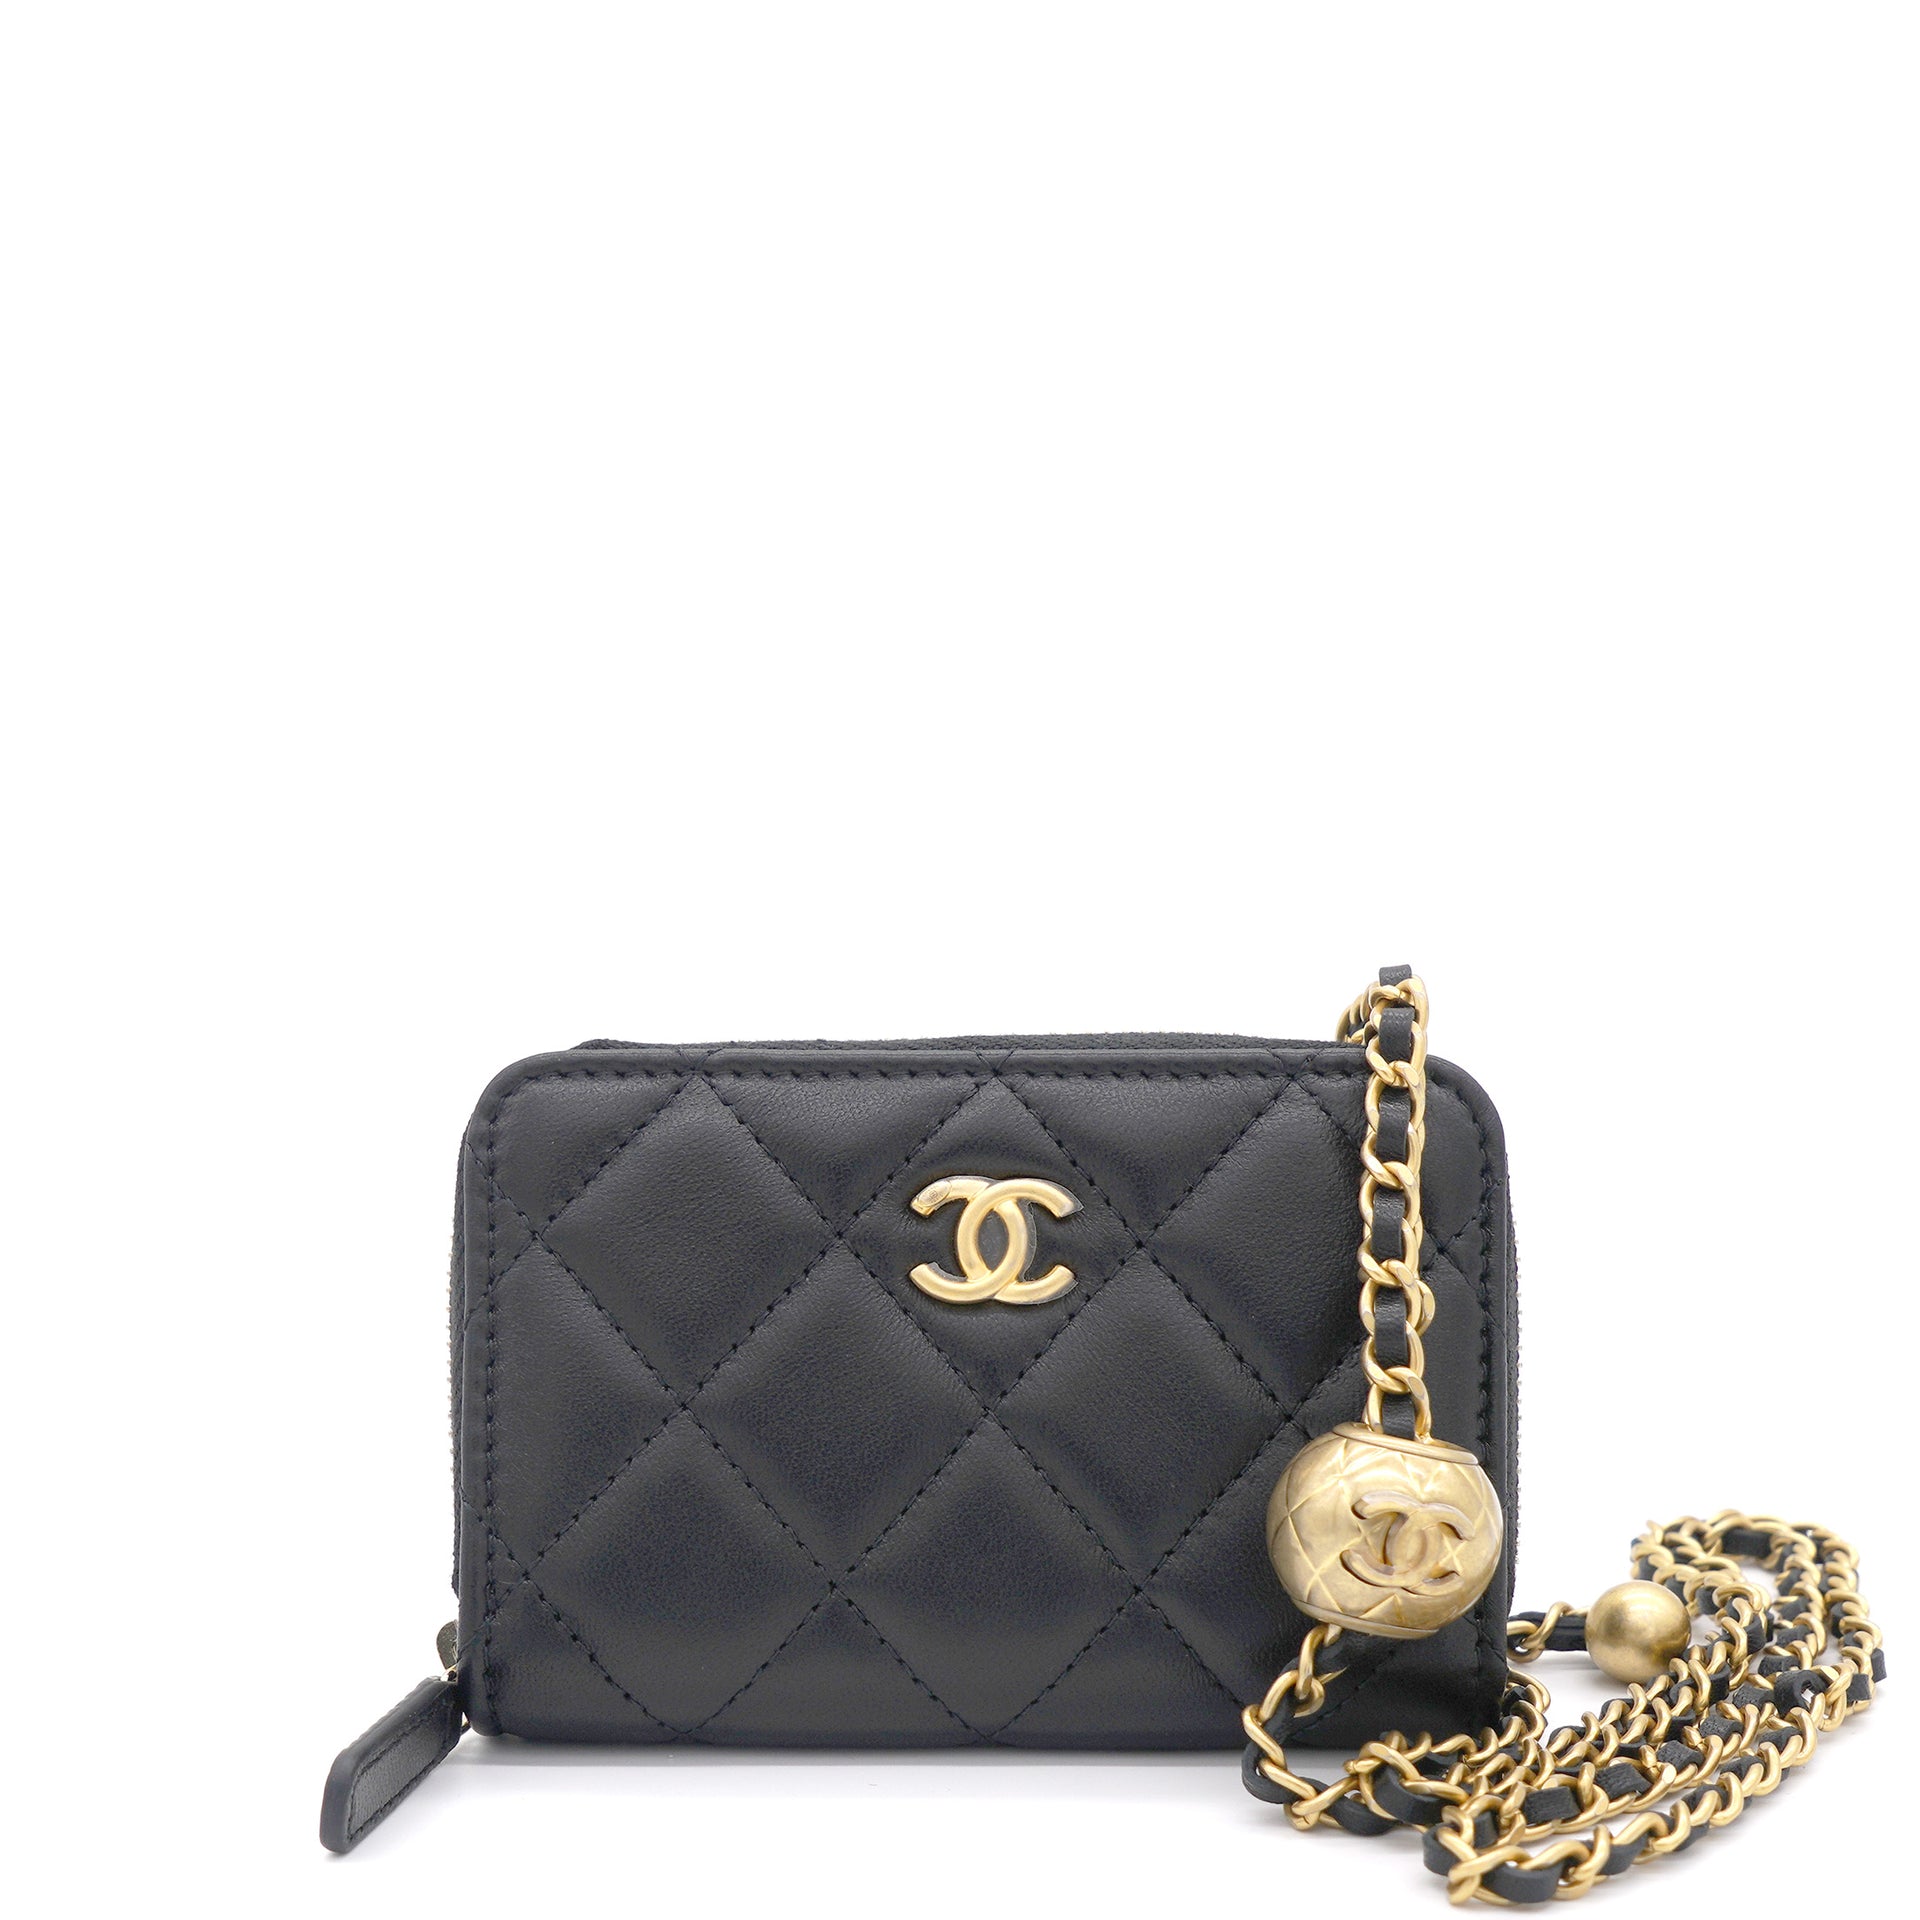 Top 84+ imagen chanel pouch with chain